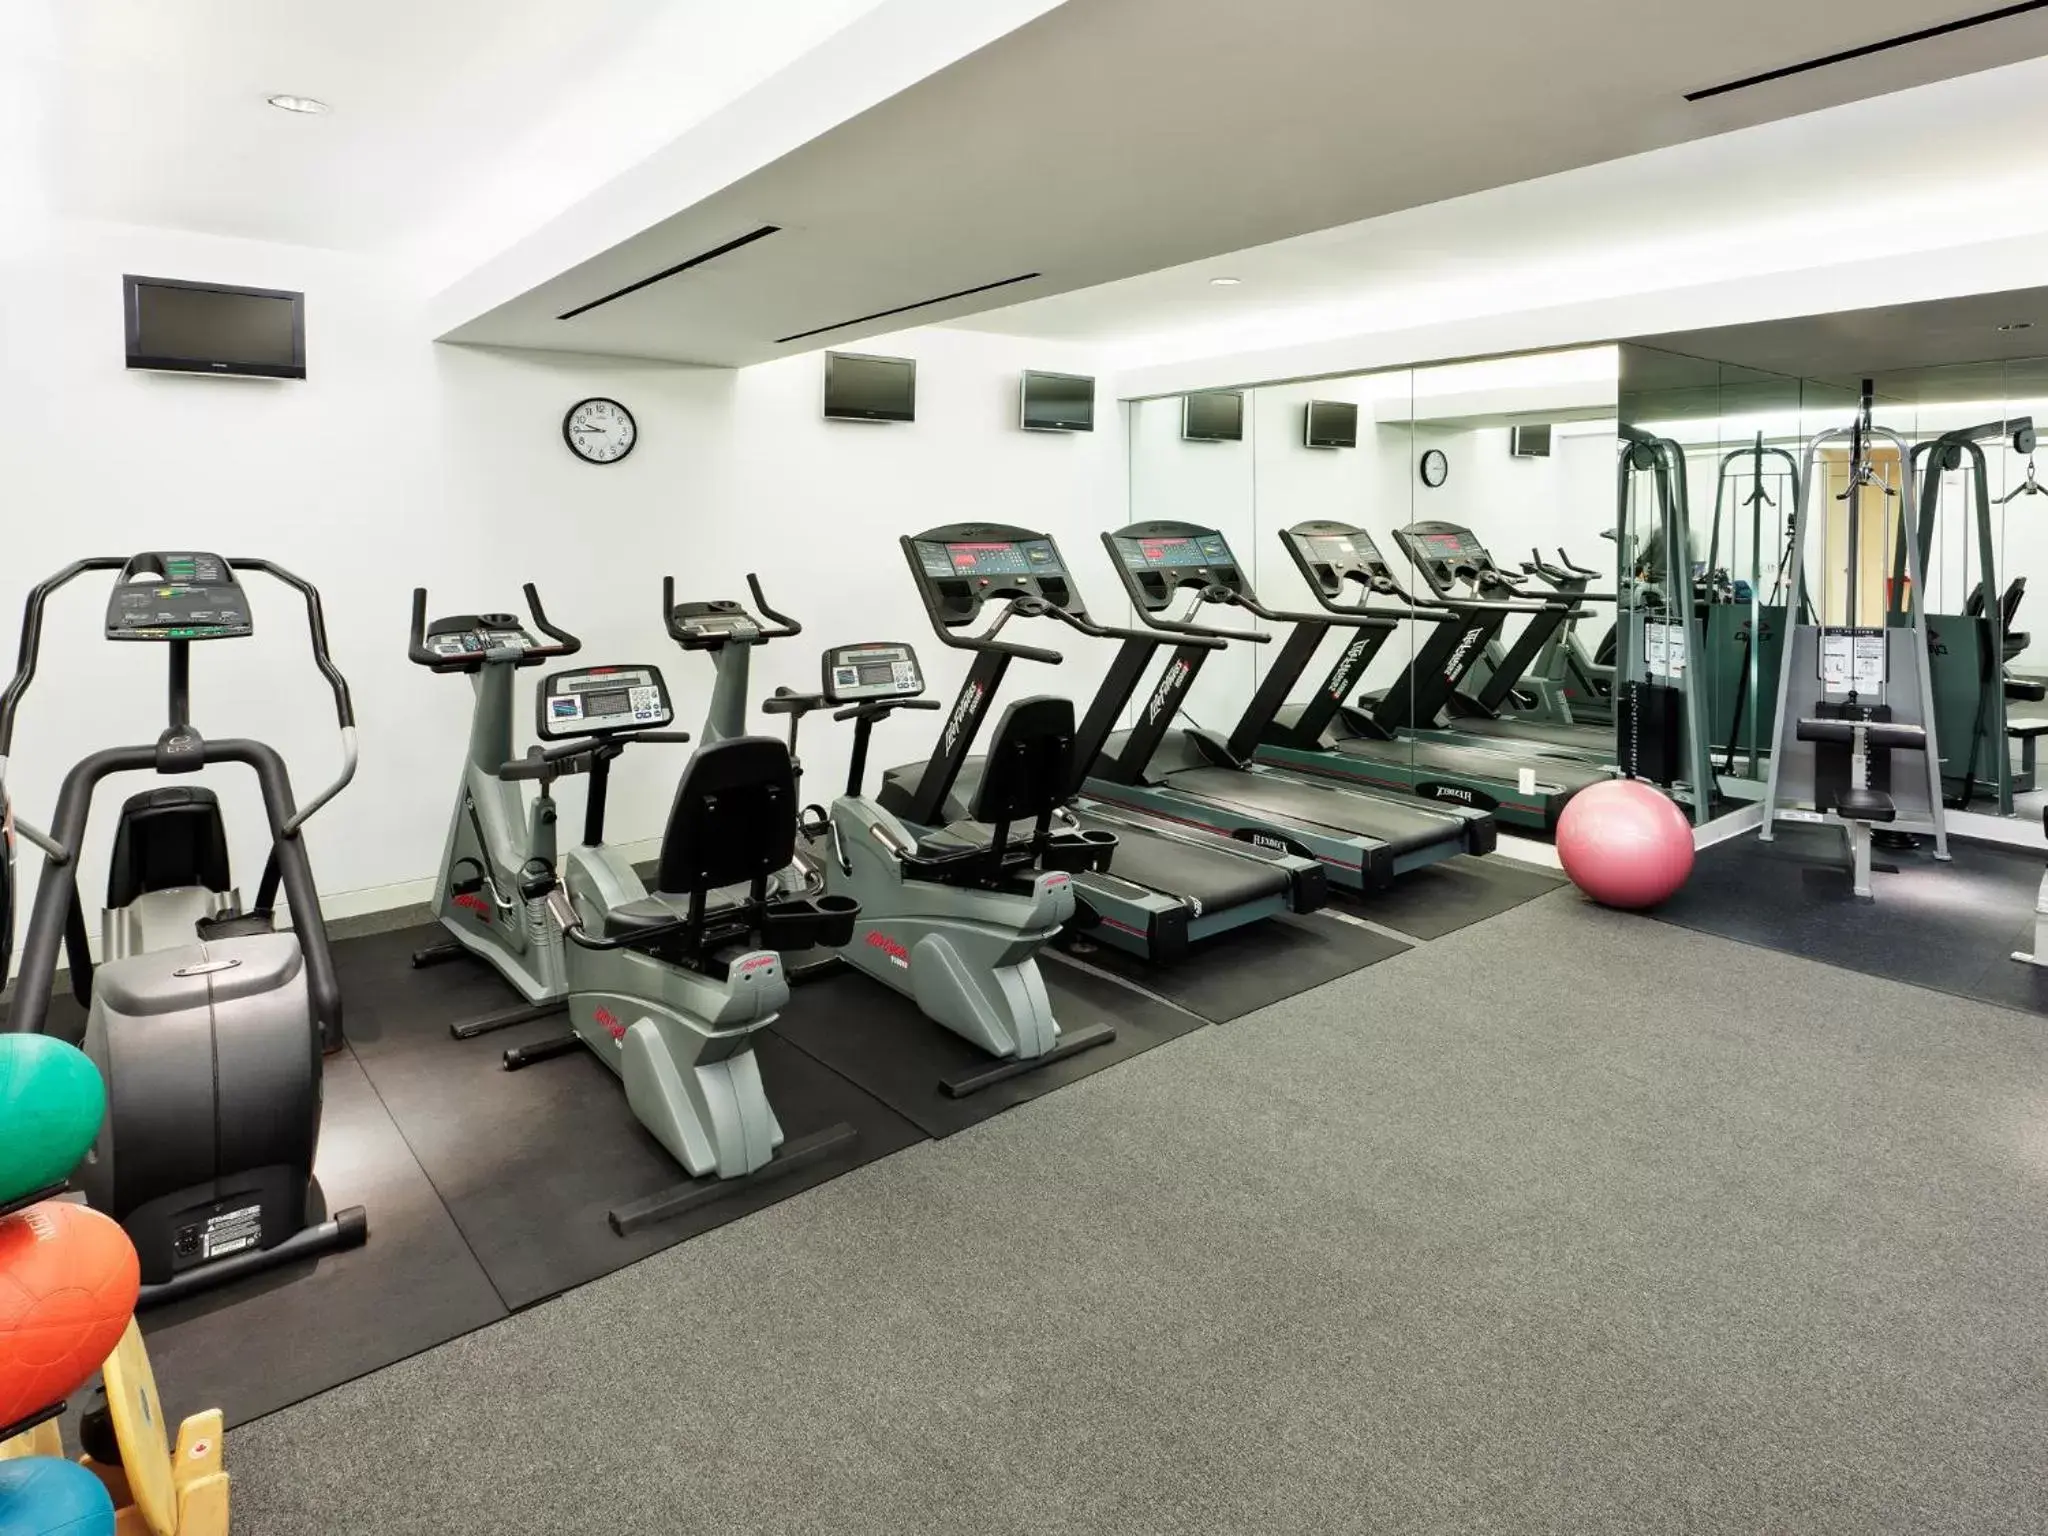 Fitness centre/facilities, Fitness Center/Facilities in Bryant Park Hotel